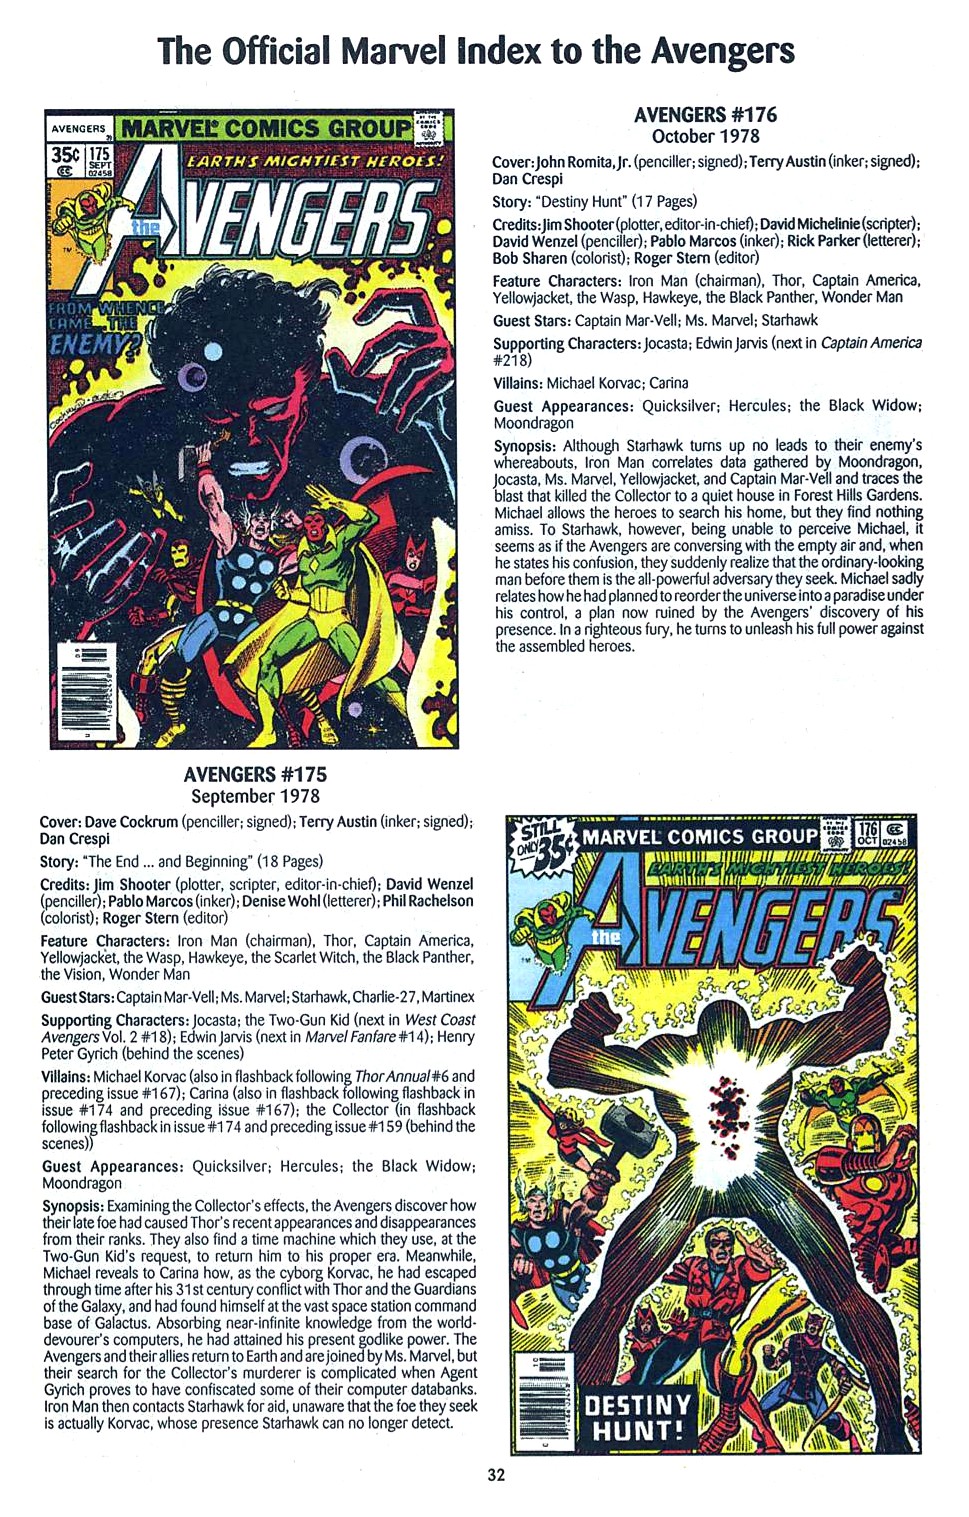 Read online The Official Marvel Index to the Avengers comic -  Issue #3 - 34